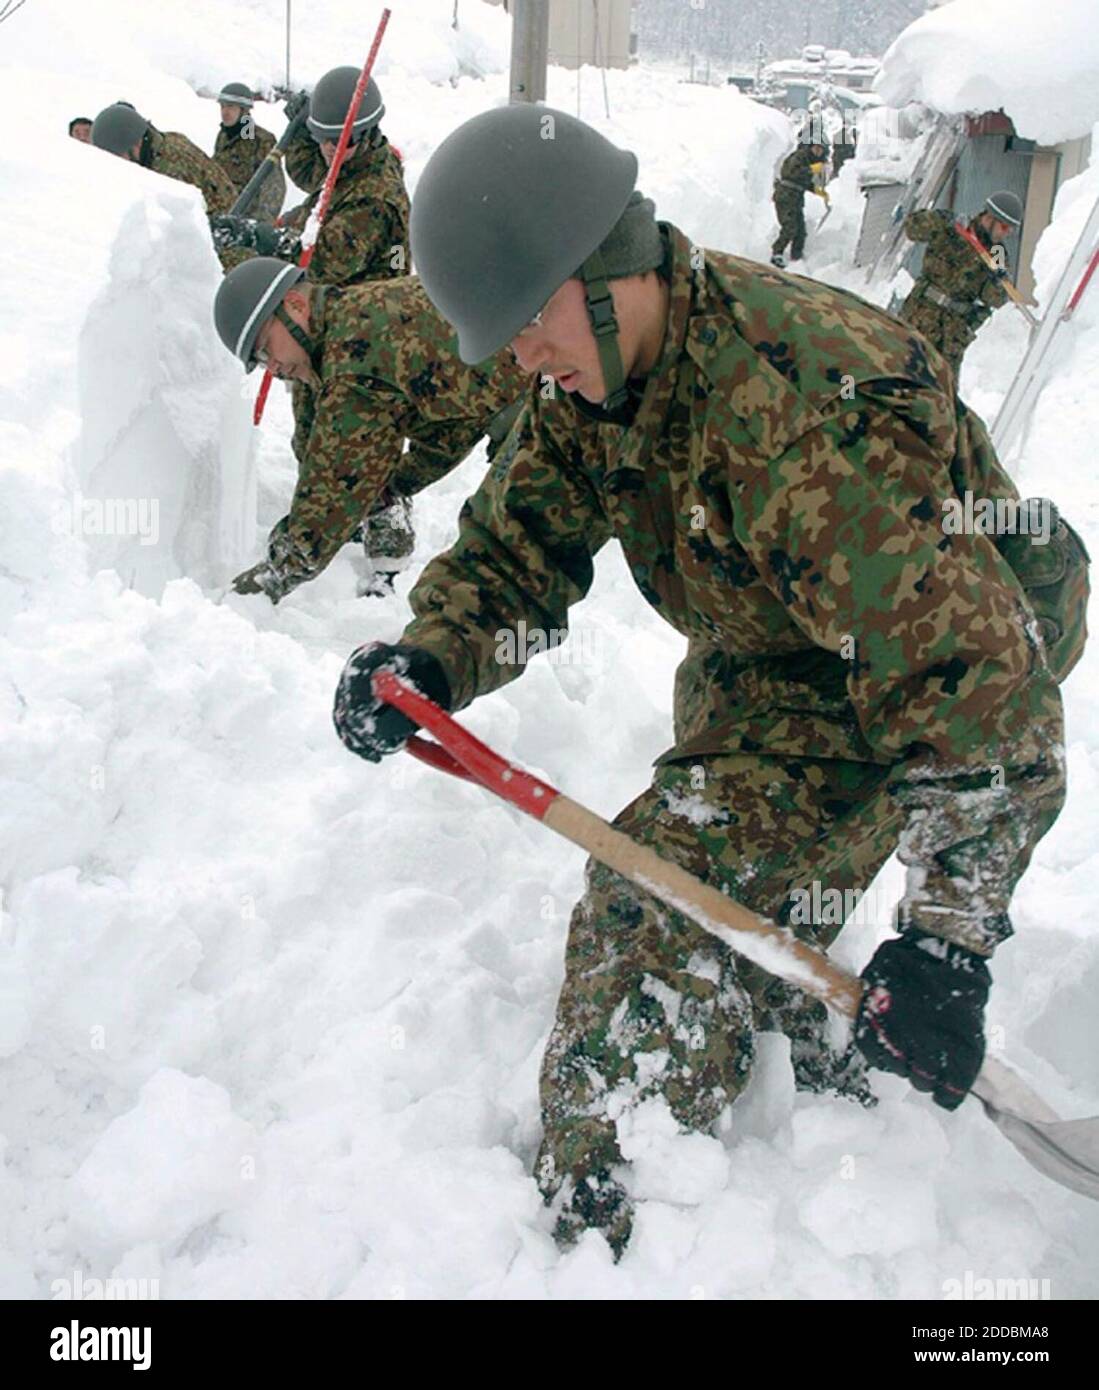 NO FILM, NO VIDEO, NO TV, NO DOCUMENTARY - Ground Self-Defense Force personnel clear snow Saturday in Iiyama, Nagano Prefecture, Japan, January 7, 2006. 71 people have died due to the snowstorms which have brought record-breaking amounts for the month of January. Photo by Yomiuri Shimbun/KRT/ABACAPRESS.COM Stock Photo